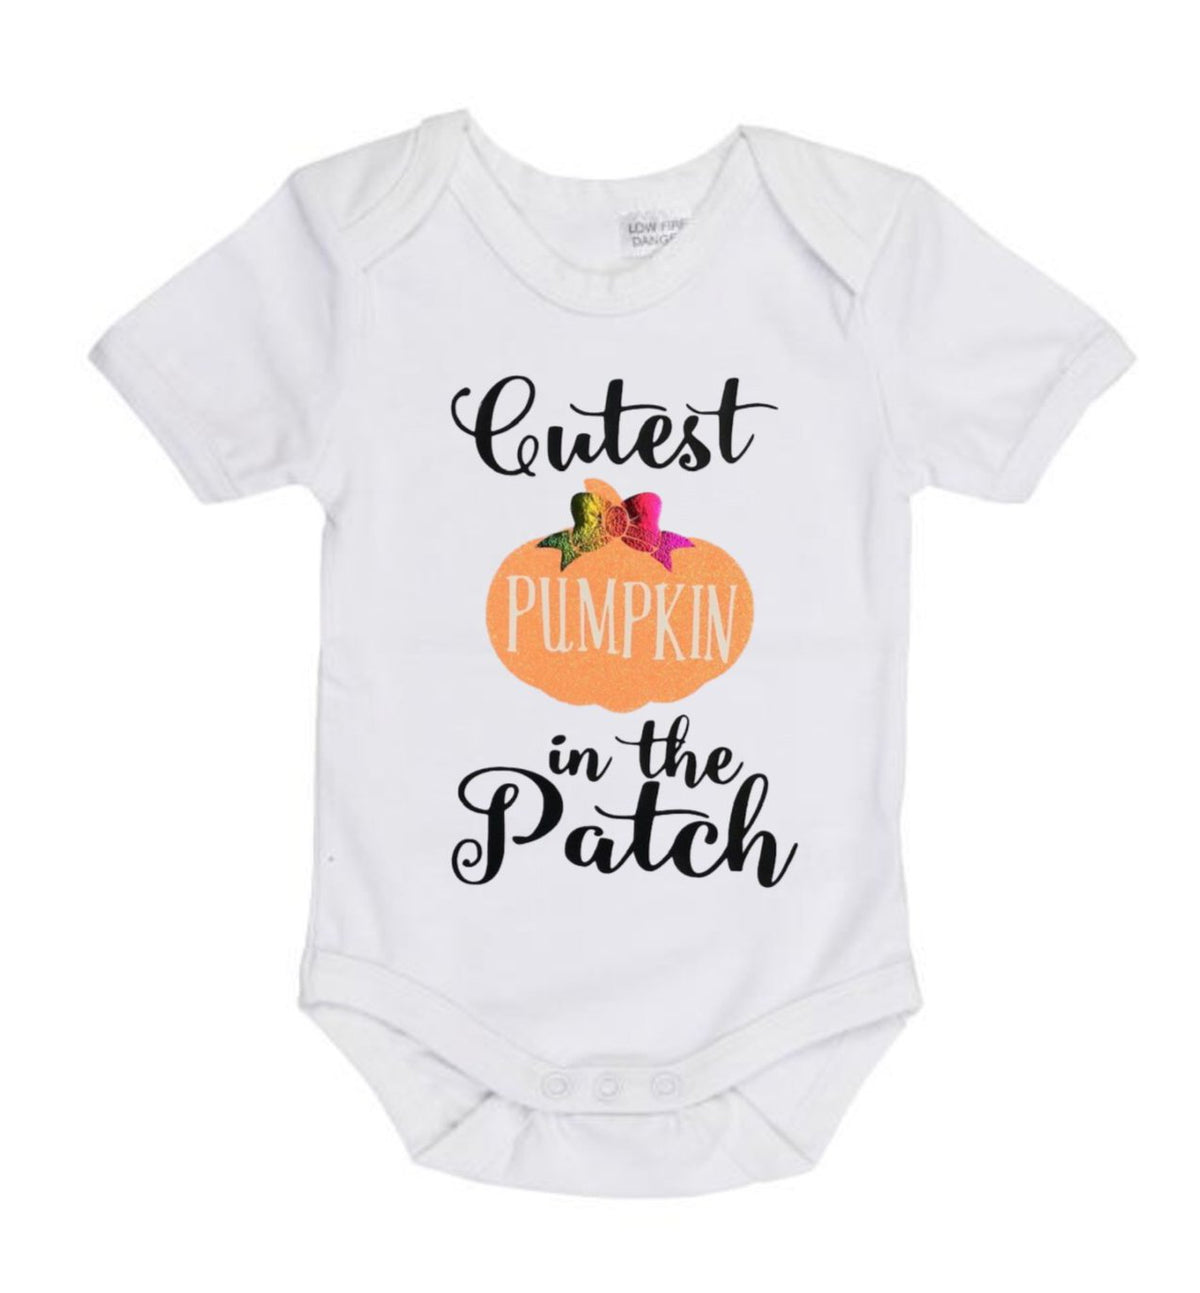 Cutest Pumpkin in the Patch! 🎃 Lullaby Lane Designs